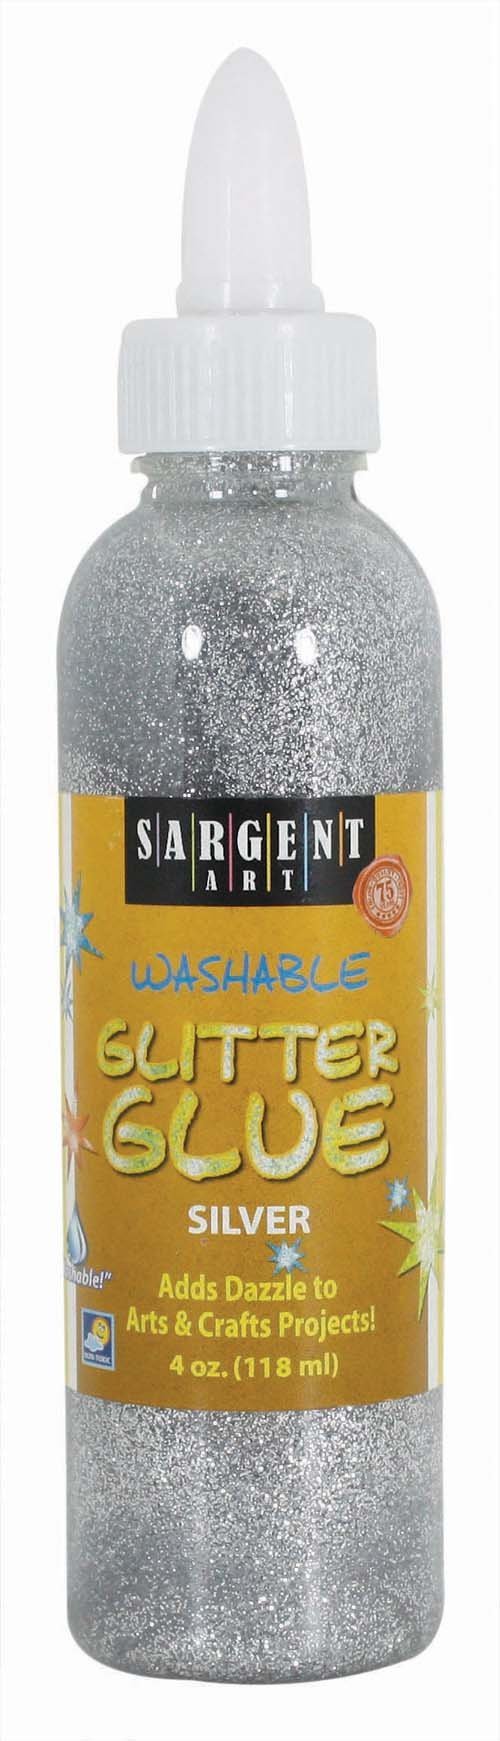 4-Ounce Sargent Art Glitter Glue (Silver) $2.19 + Free Shipping w/ Prime or on Orders $35+